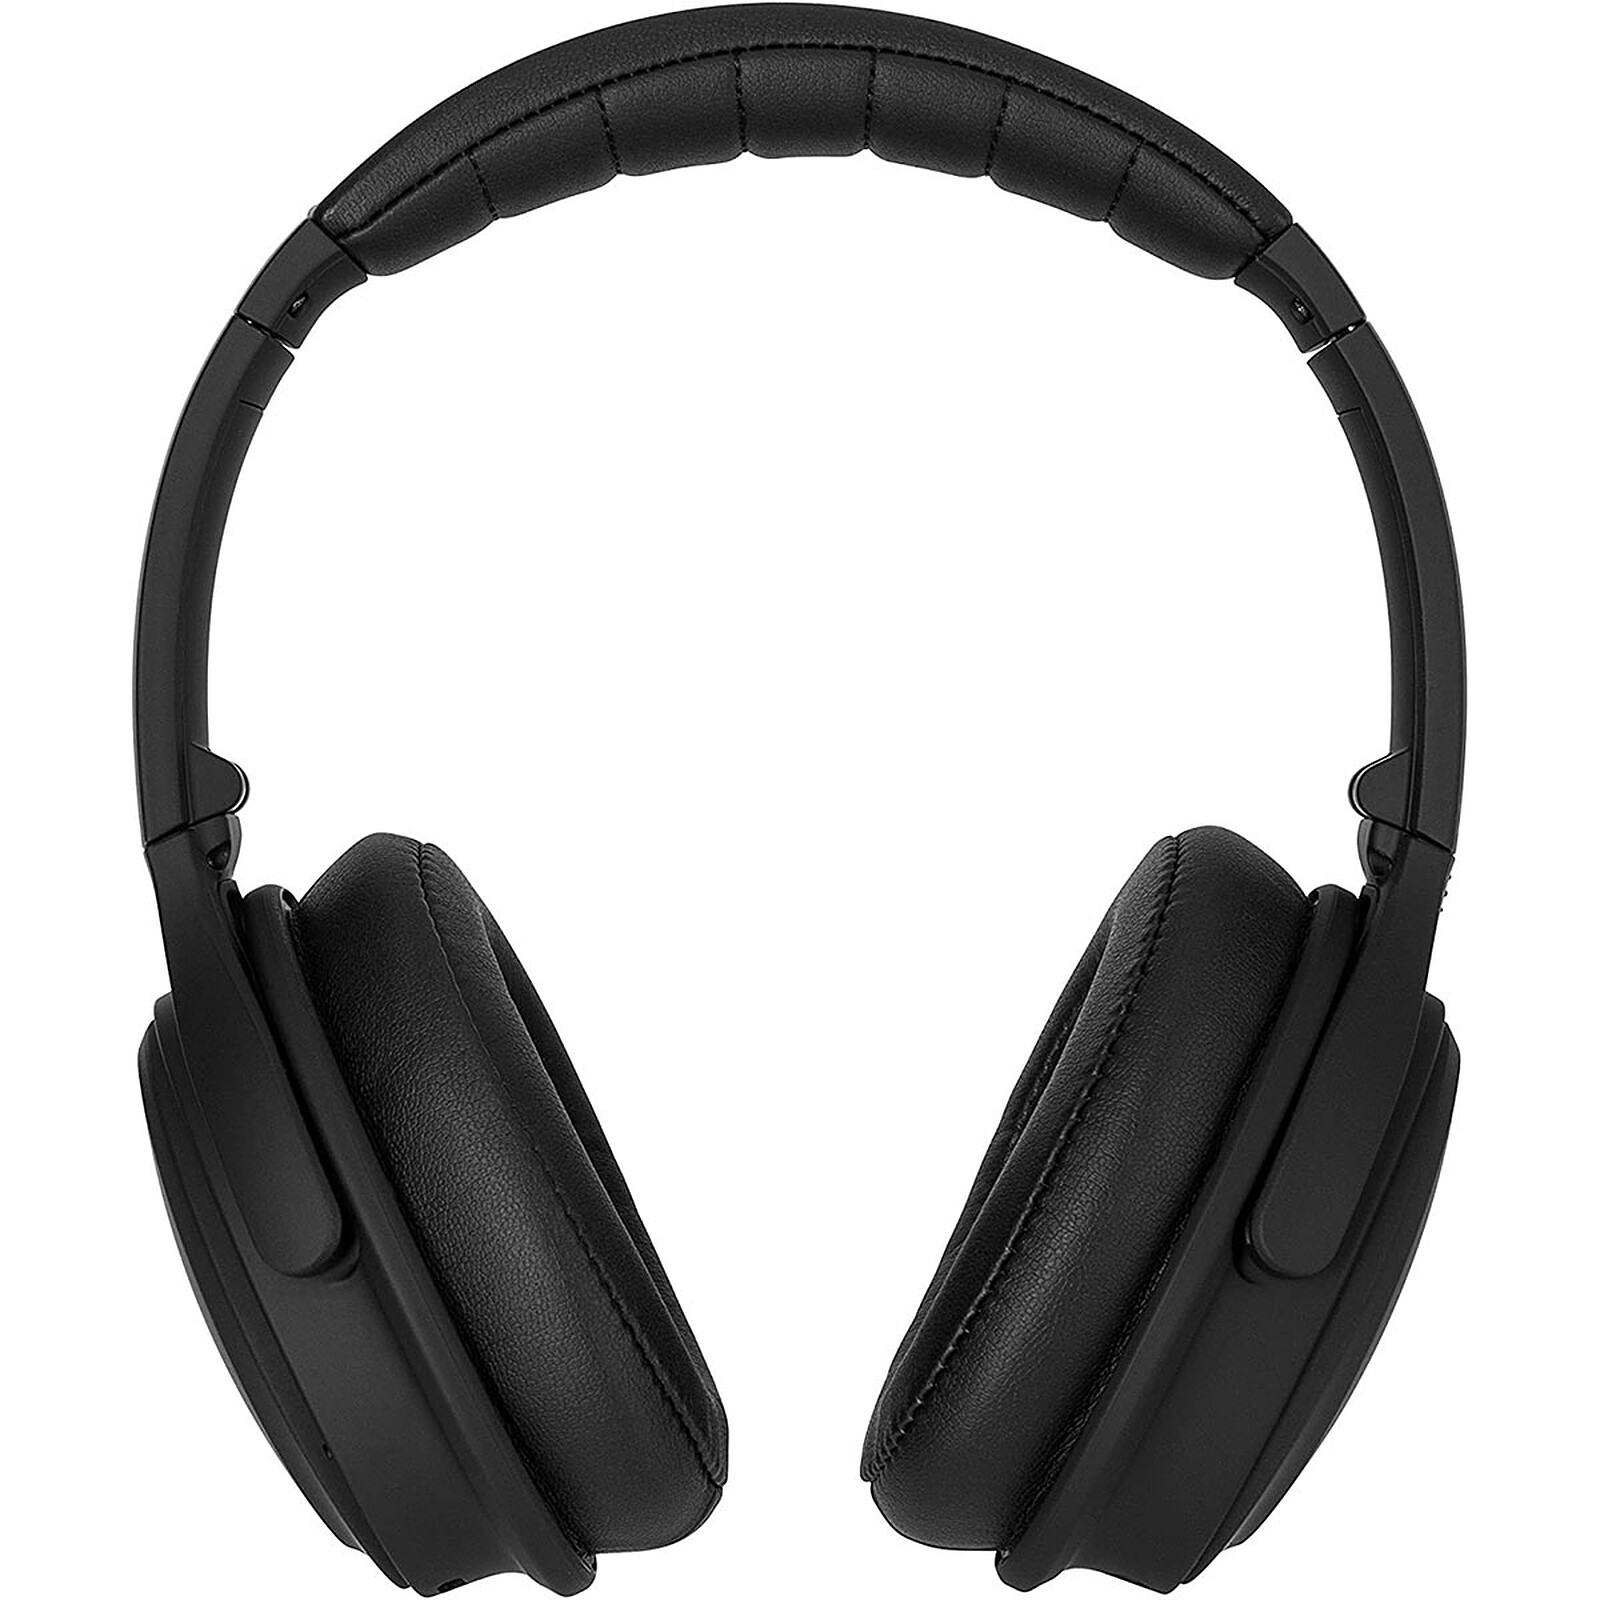 Xqisit OE400 Negro - Kit manos libres y auriculares - LDLC